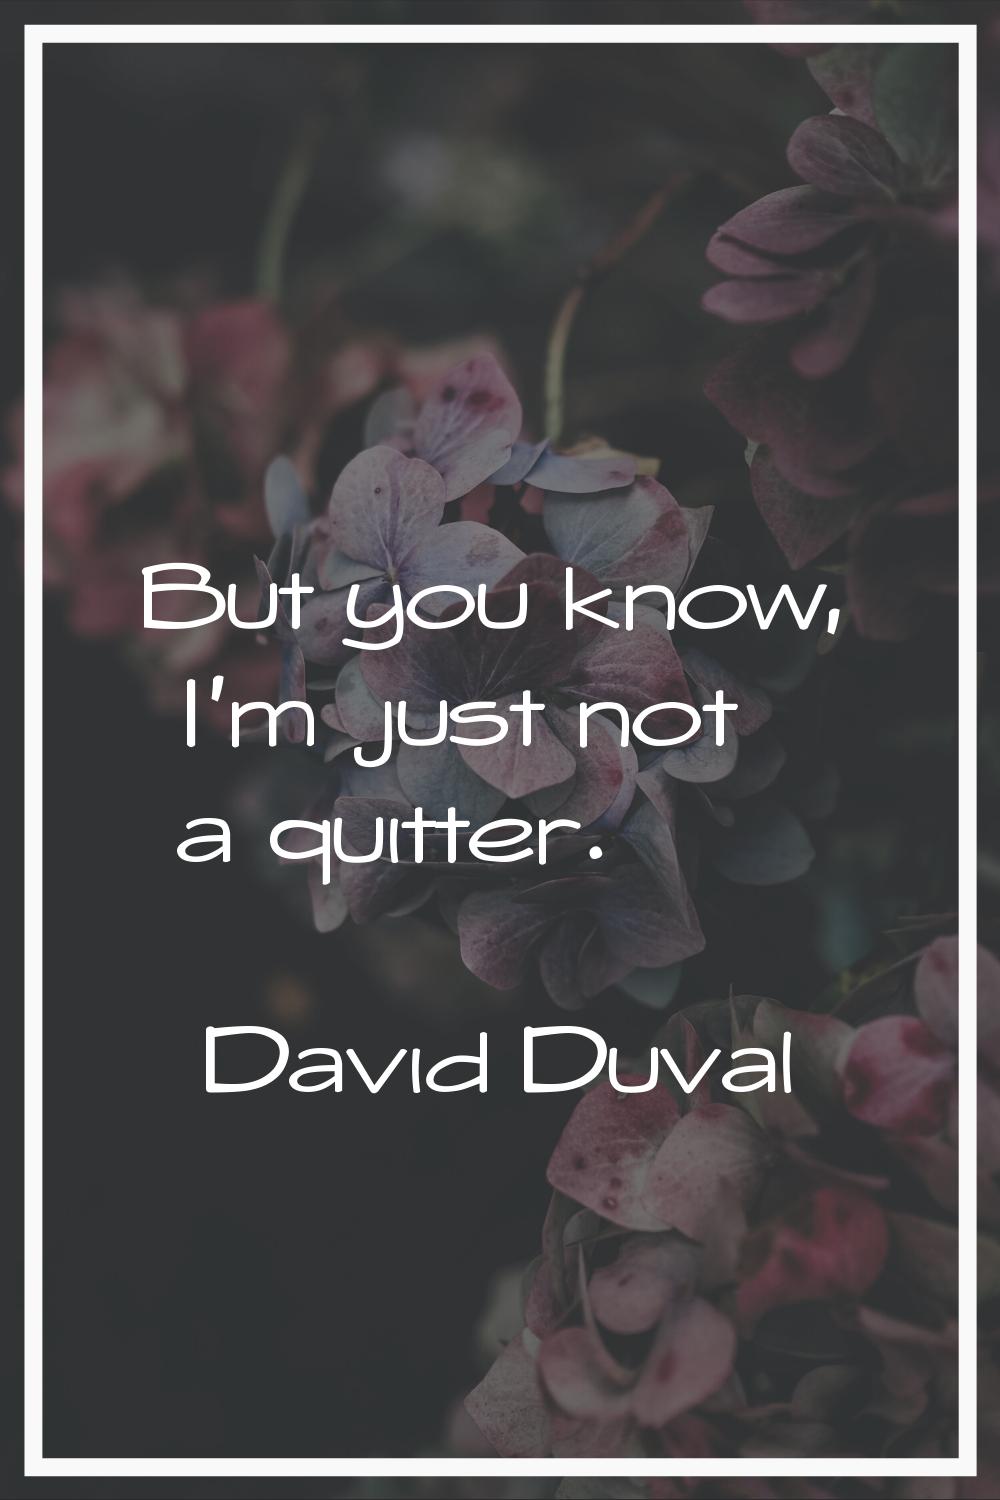 But you know, I'm just not a quitter.